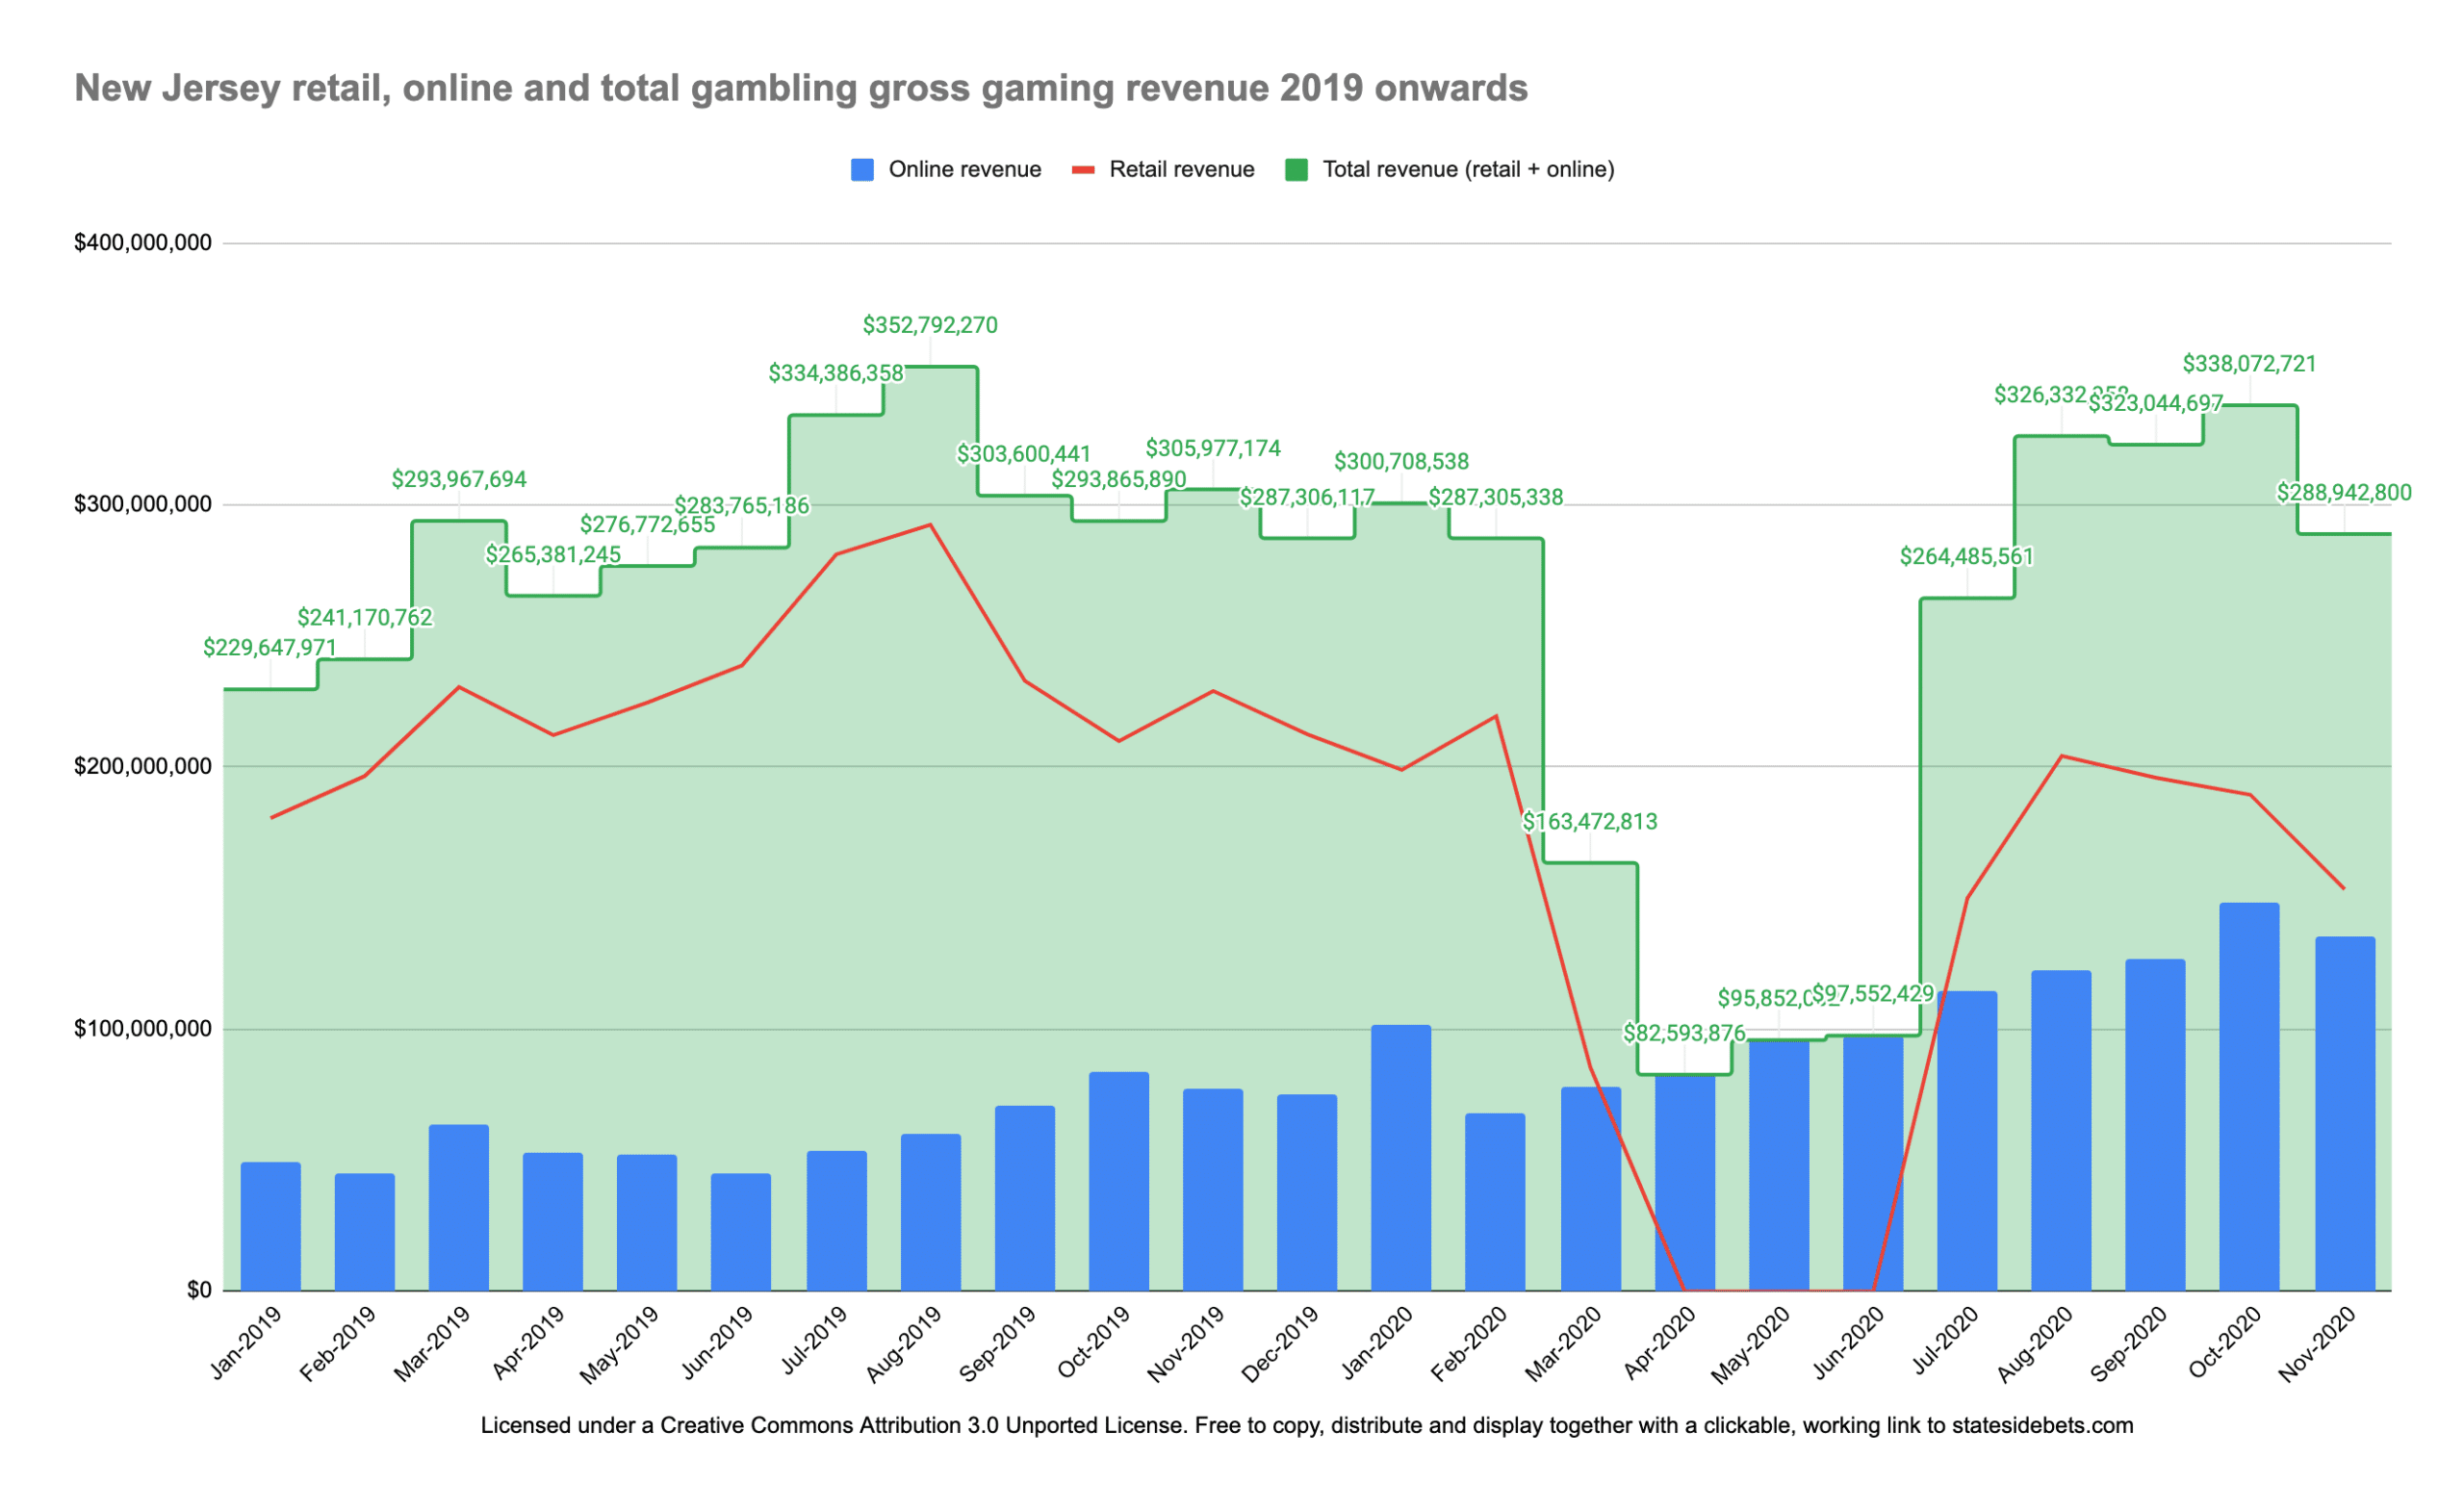 This chart shows total gambling revenue in New Jersey from Jan 2019 onwards. The chart includes both retail (physical/bricks and mortar) and online casino and sportsbook operator figures. Top figure shows monthly retail + online combined revenue.